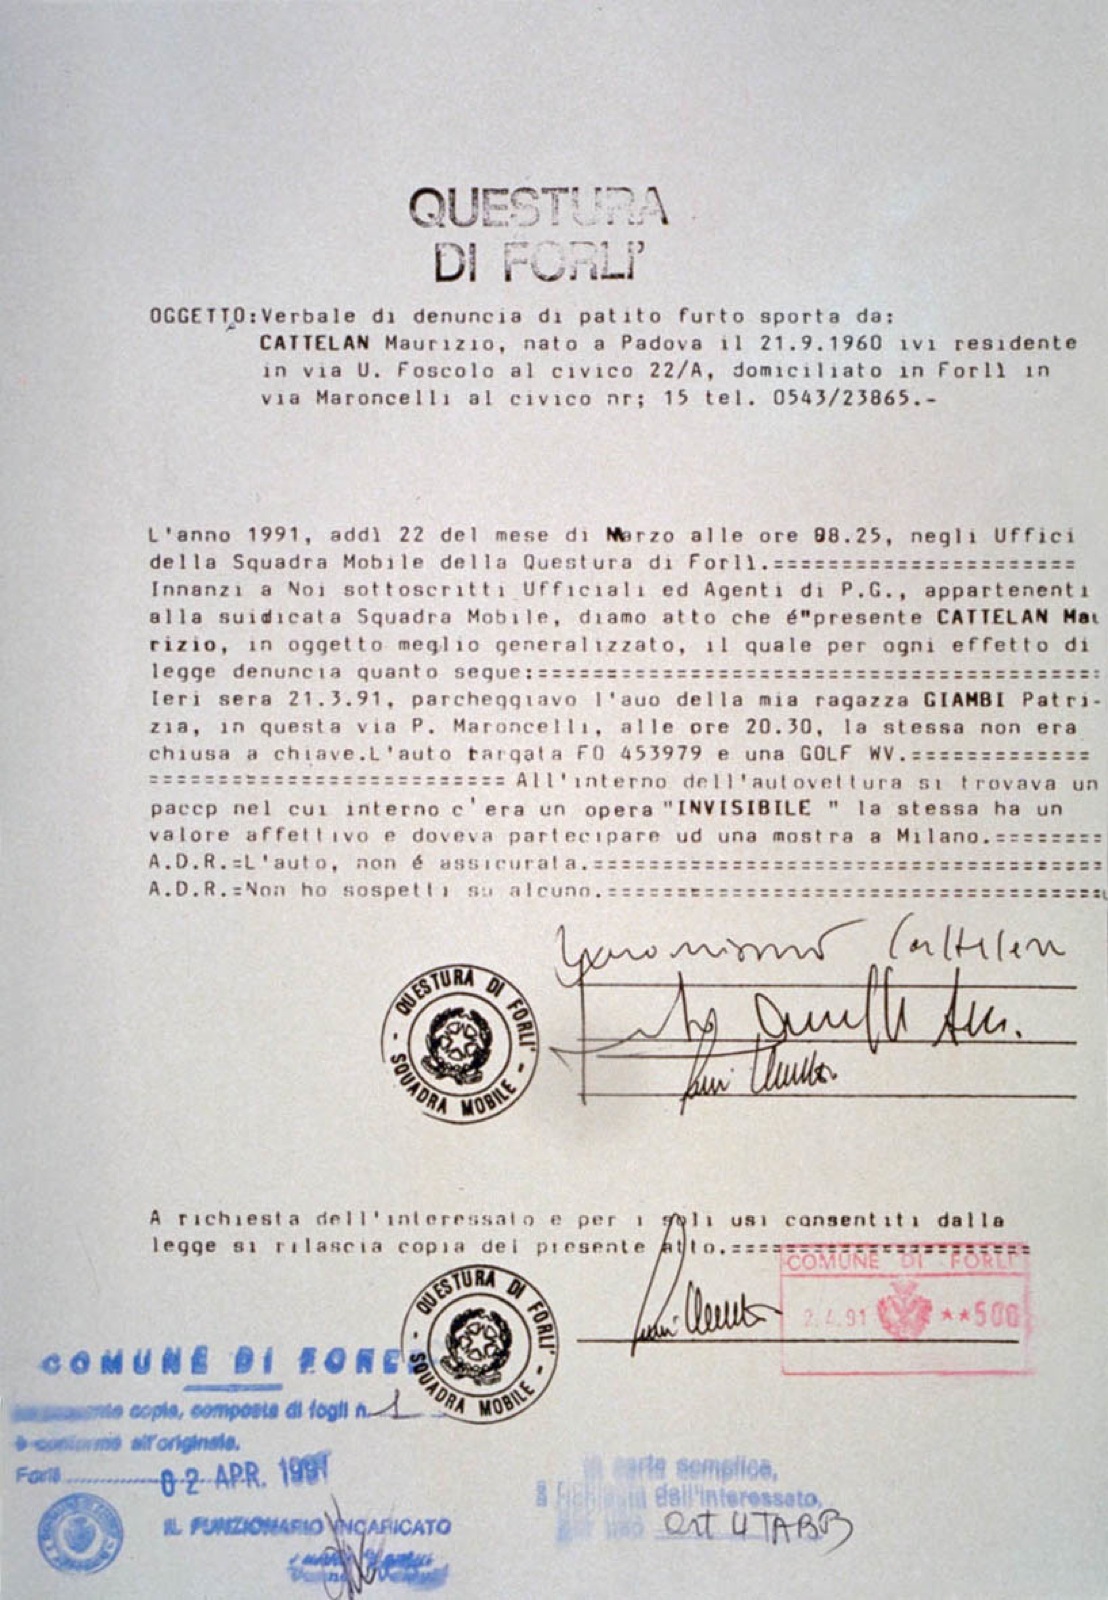 19_maurizio cattelan_Untitled 1991 Police report of stolen invisible artwork